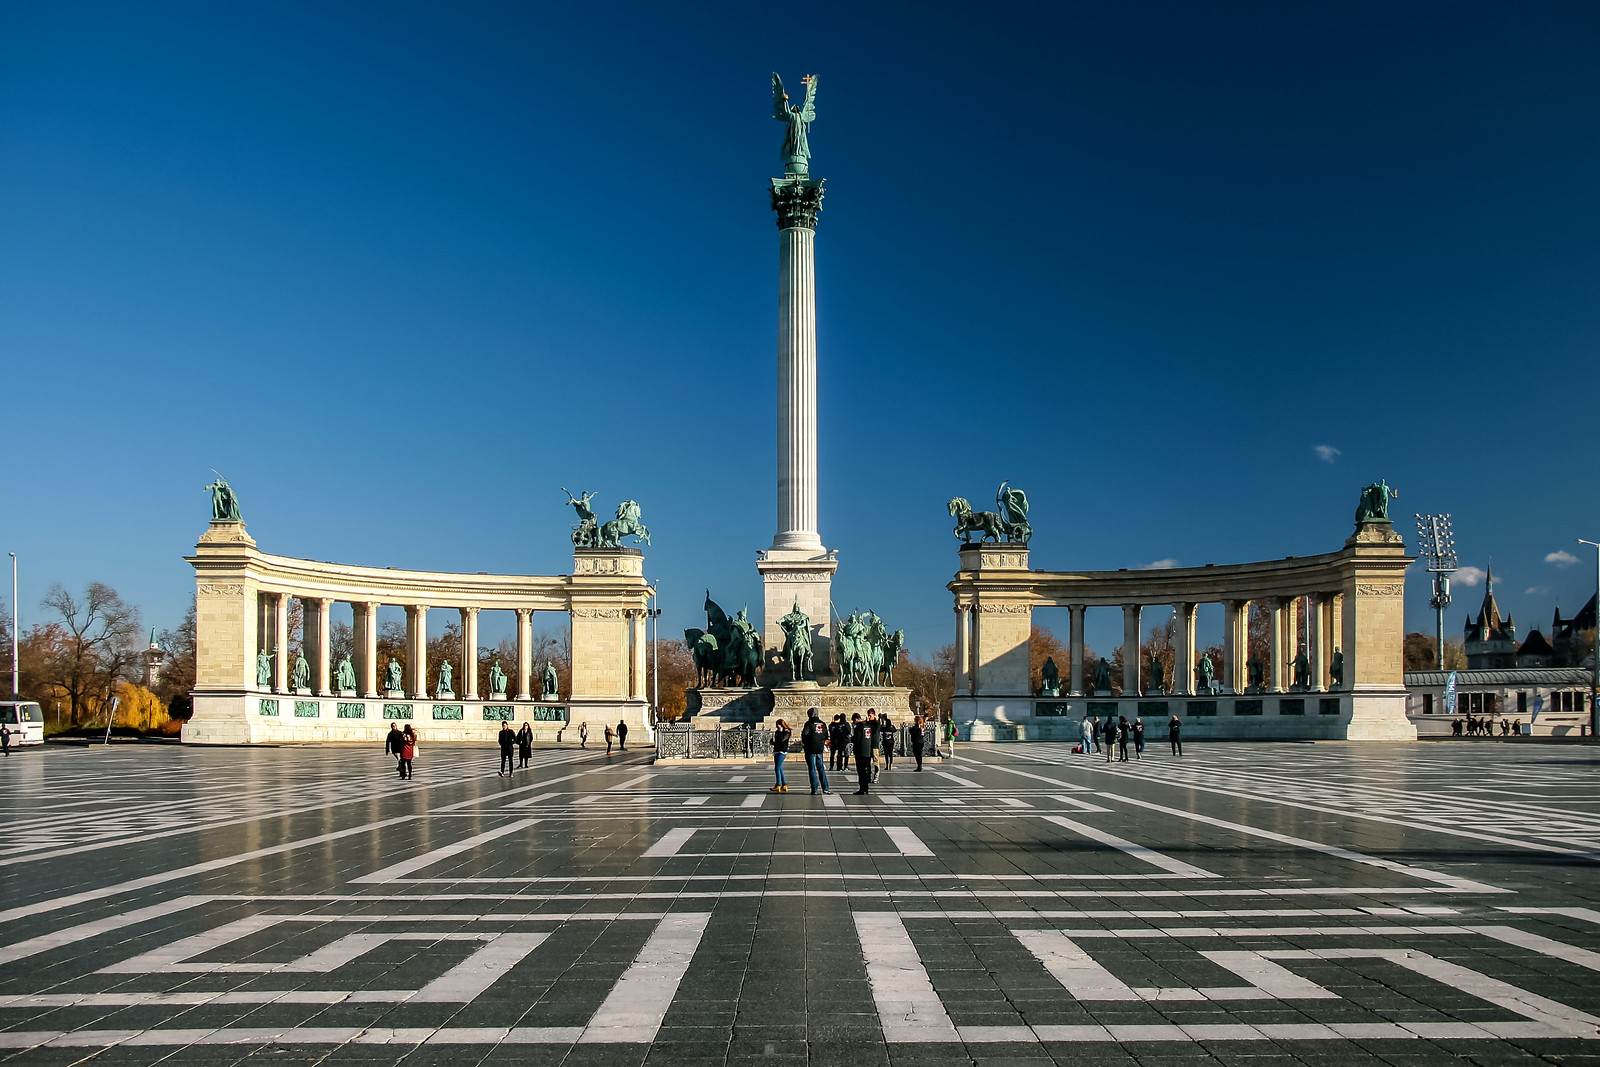 Budapest: Heroes' Square